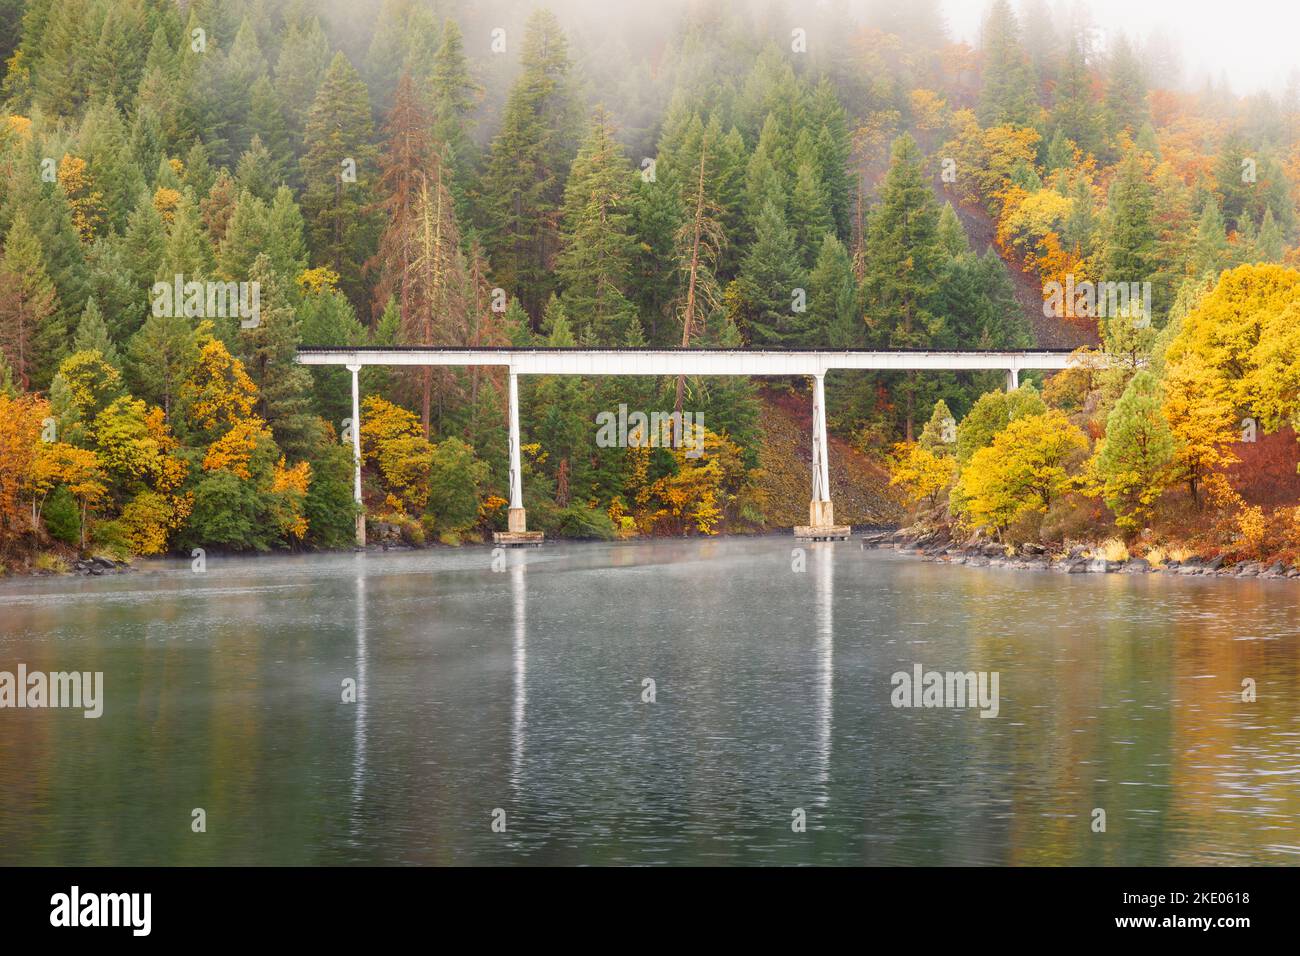 Rail trestle used in the movie Stand By Me over lake Britton in Shasta County, California, USA photographed in autumn with low clouds/fog. Stock Photo